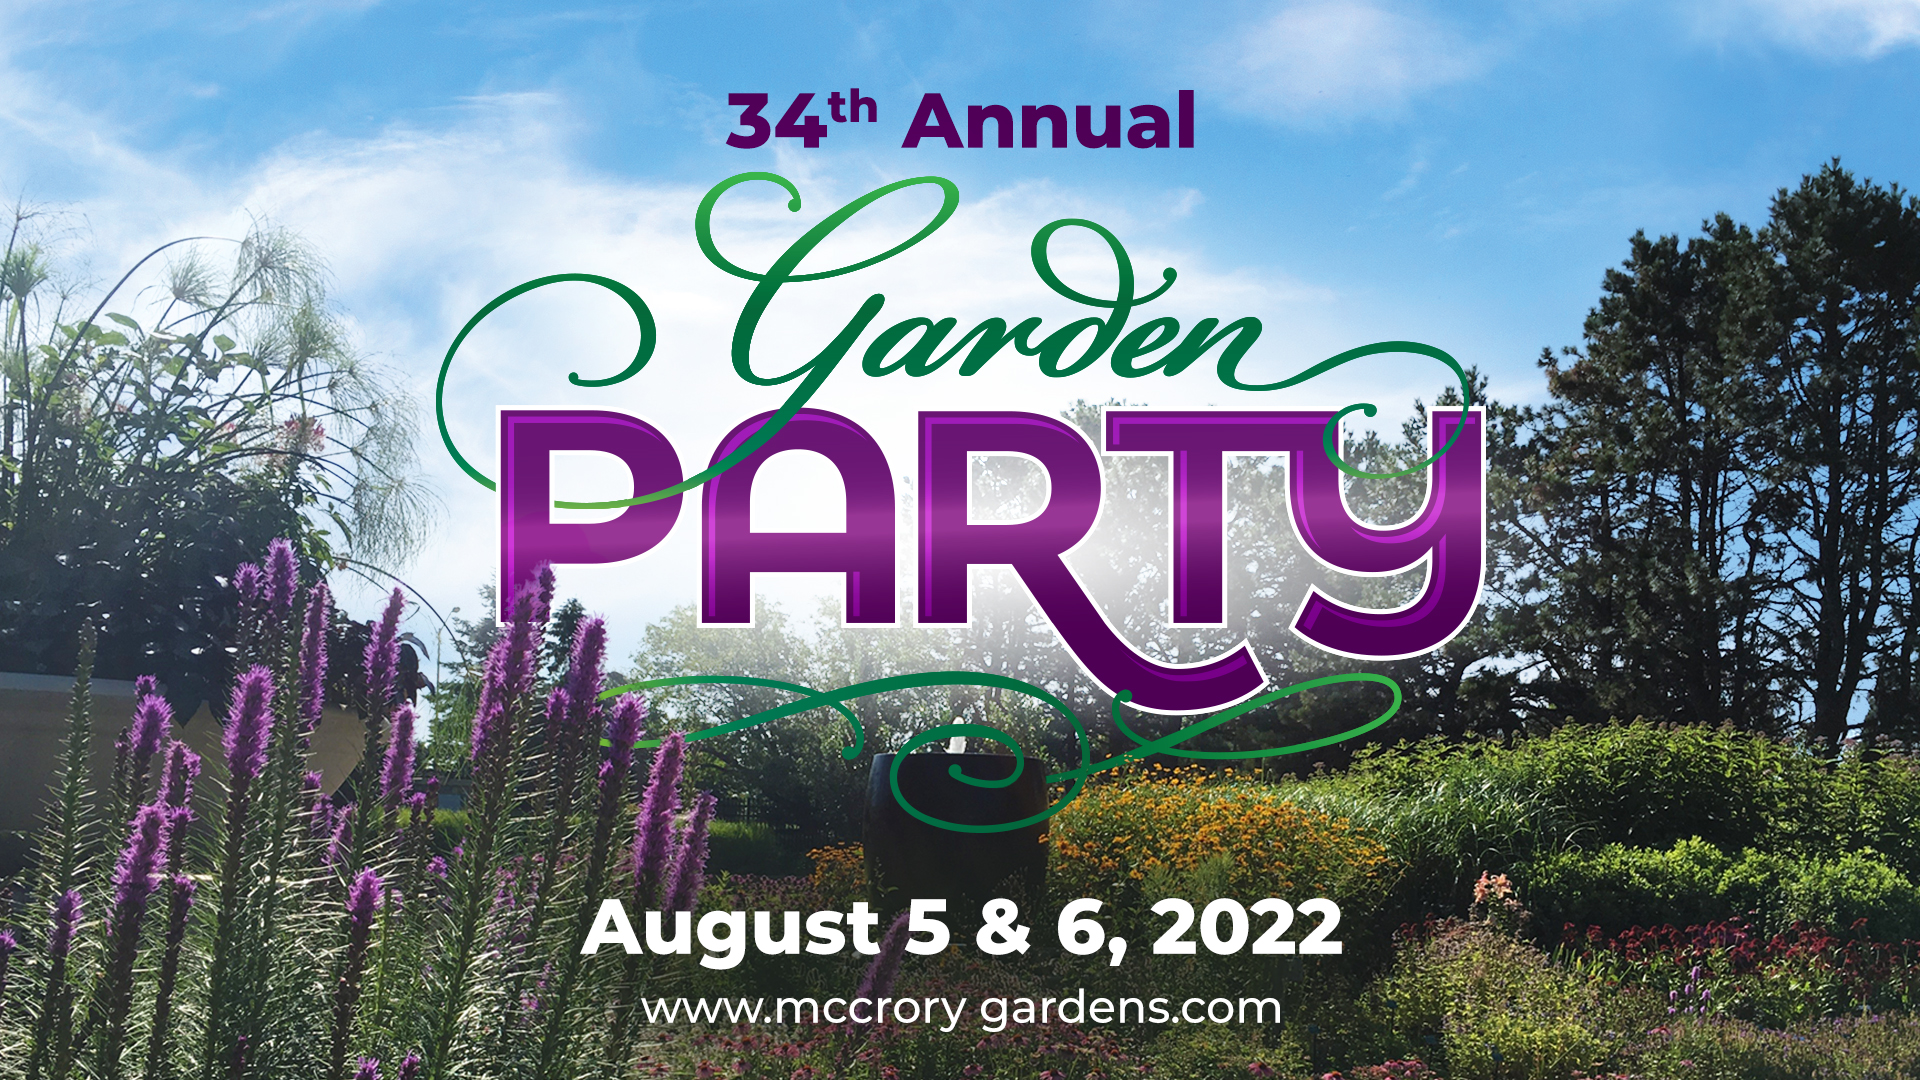 34th Annual Garden Party at McCrory Gardens